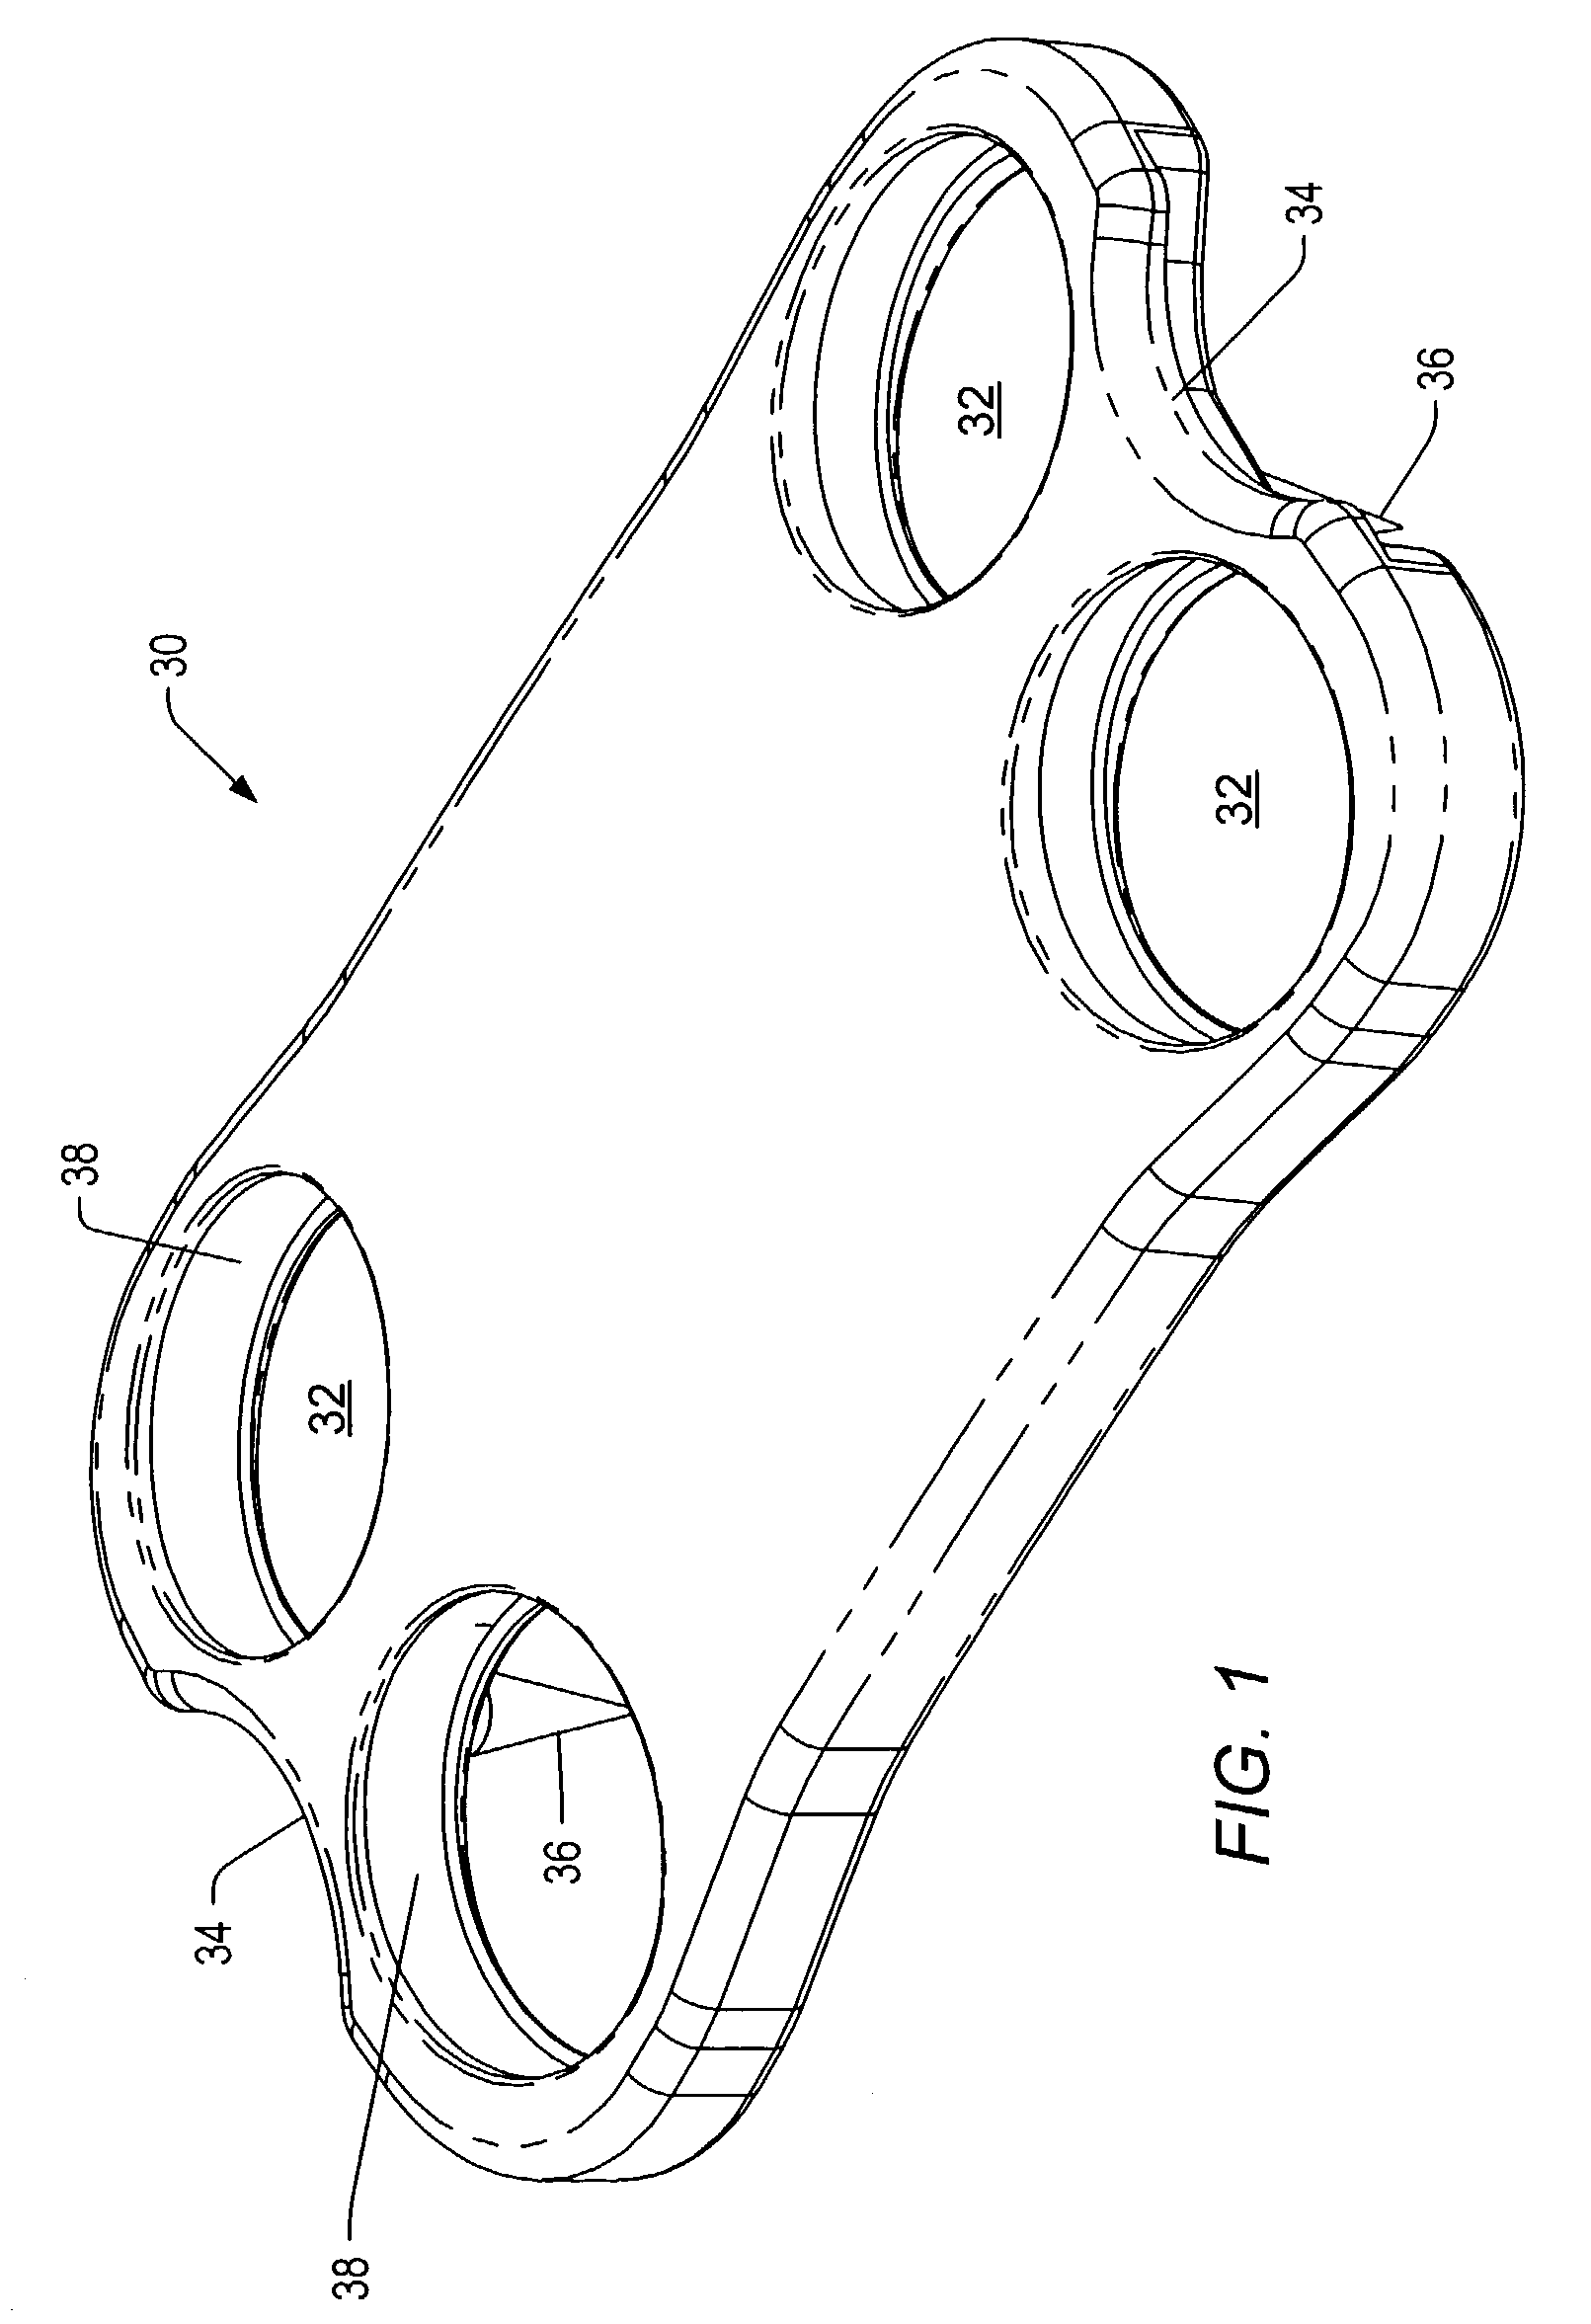 Spinal plate extender system and method